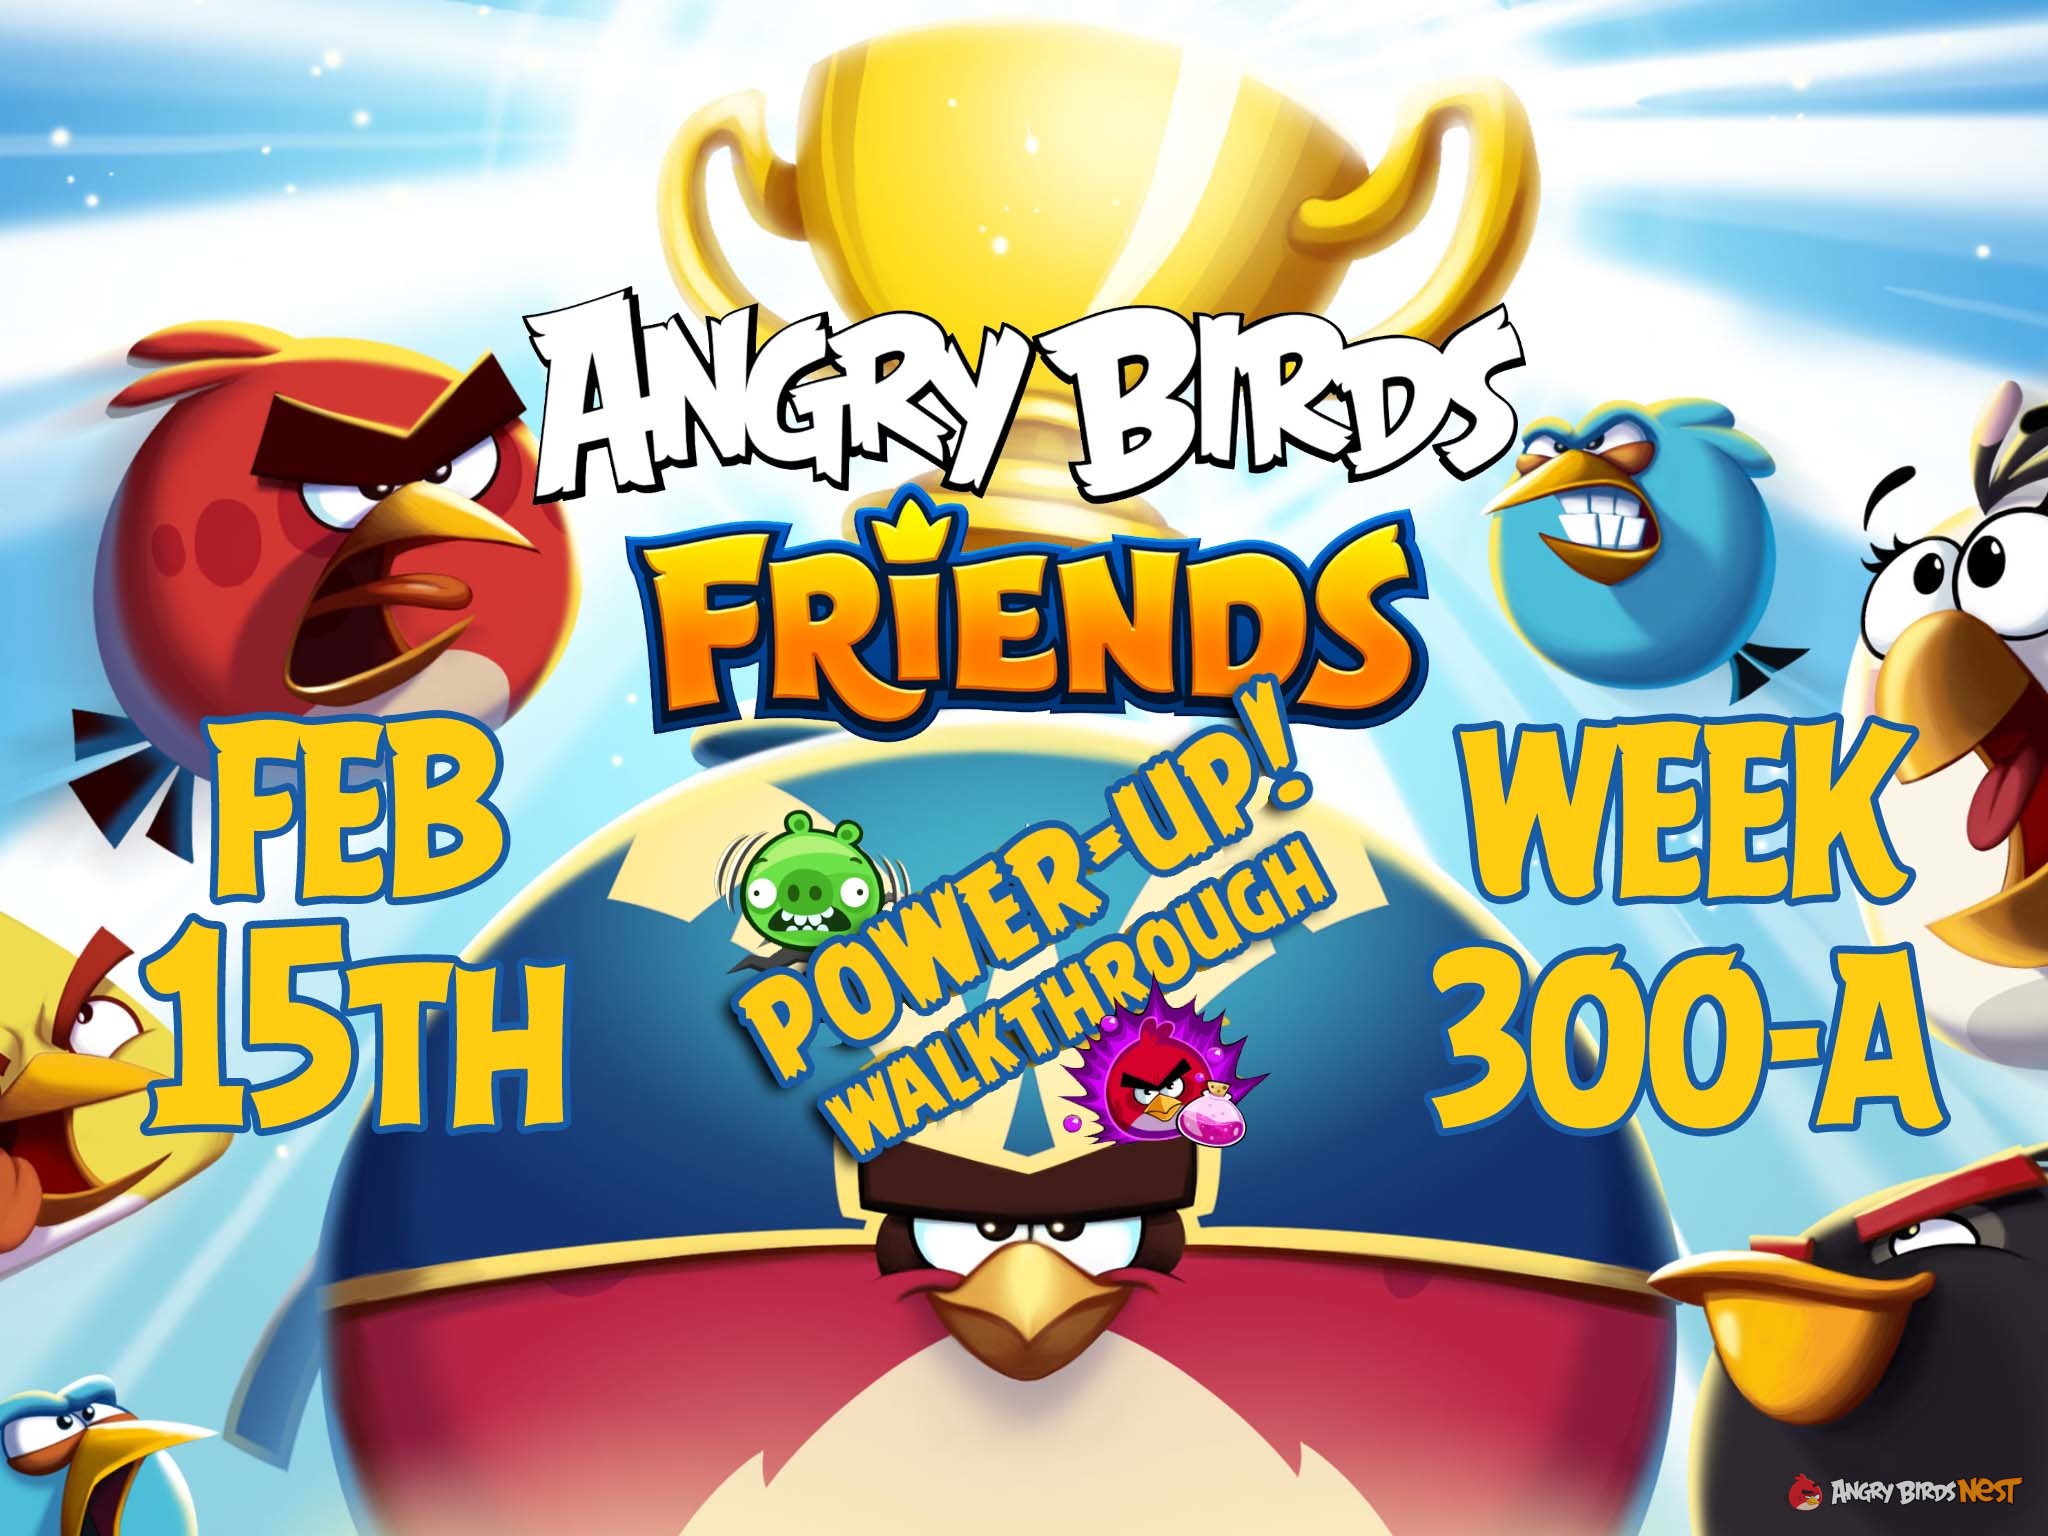 Angry Birds Friends Tournament Week 300-A Feature Image PU